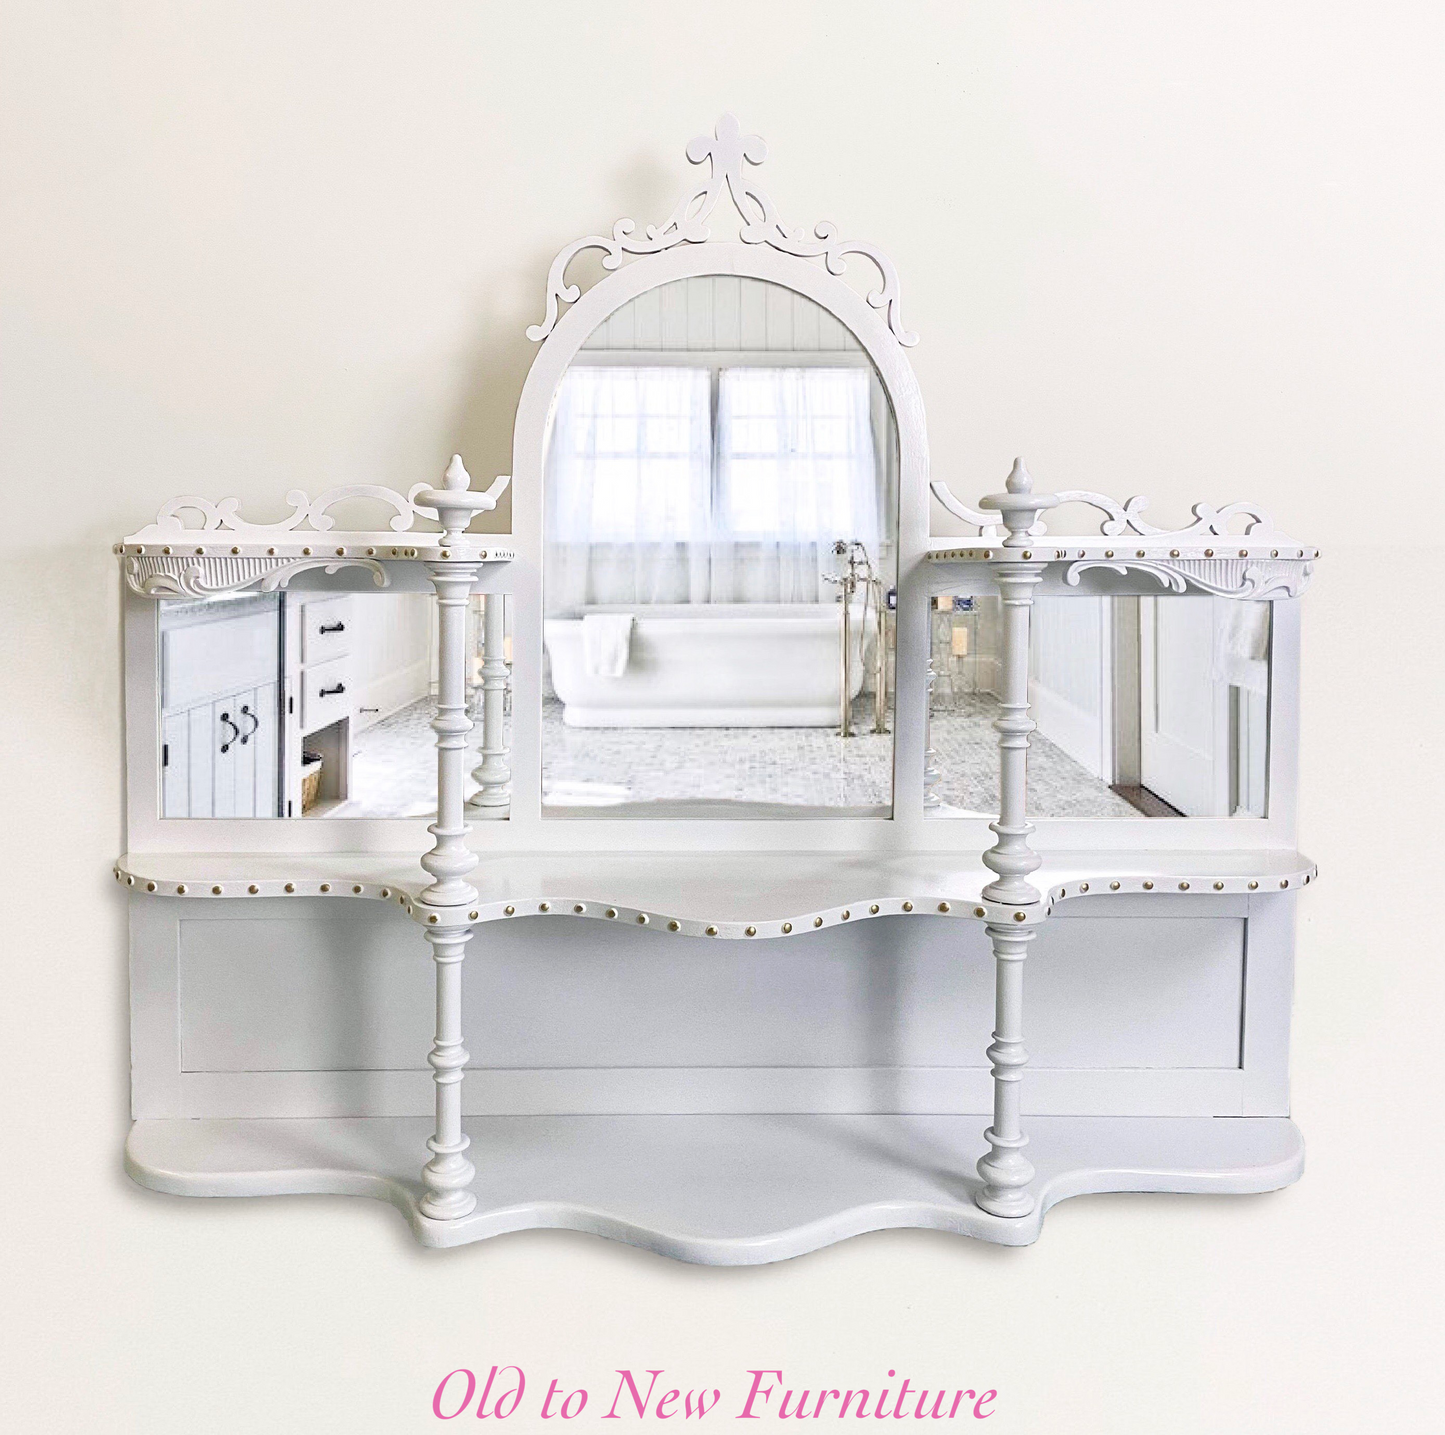 Antique Mirror Storage Shelf Painted White and Gold With Fusion Mineral Paint Picket Fence